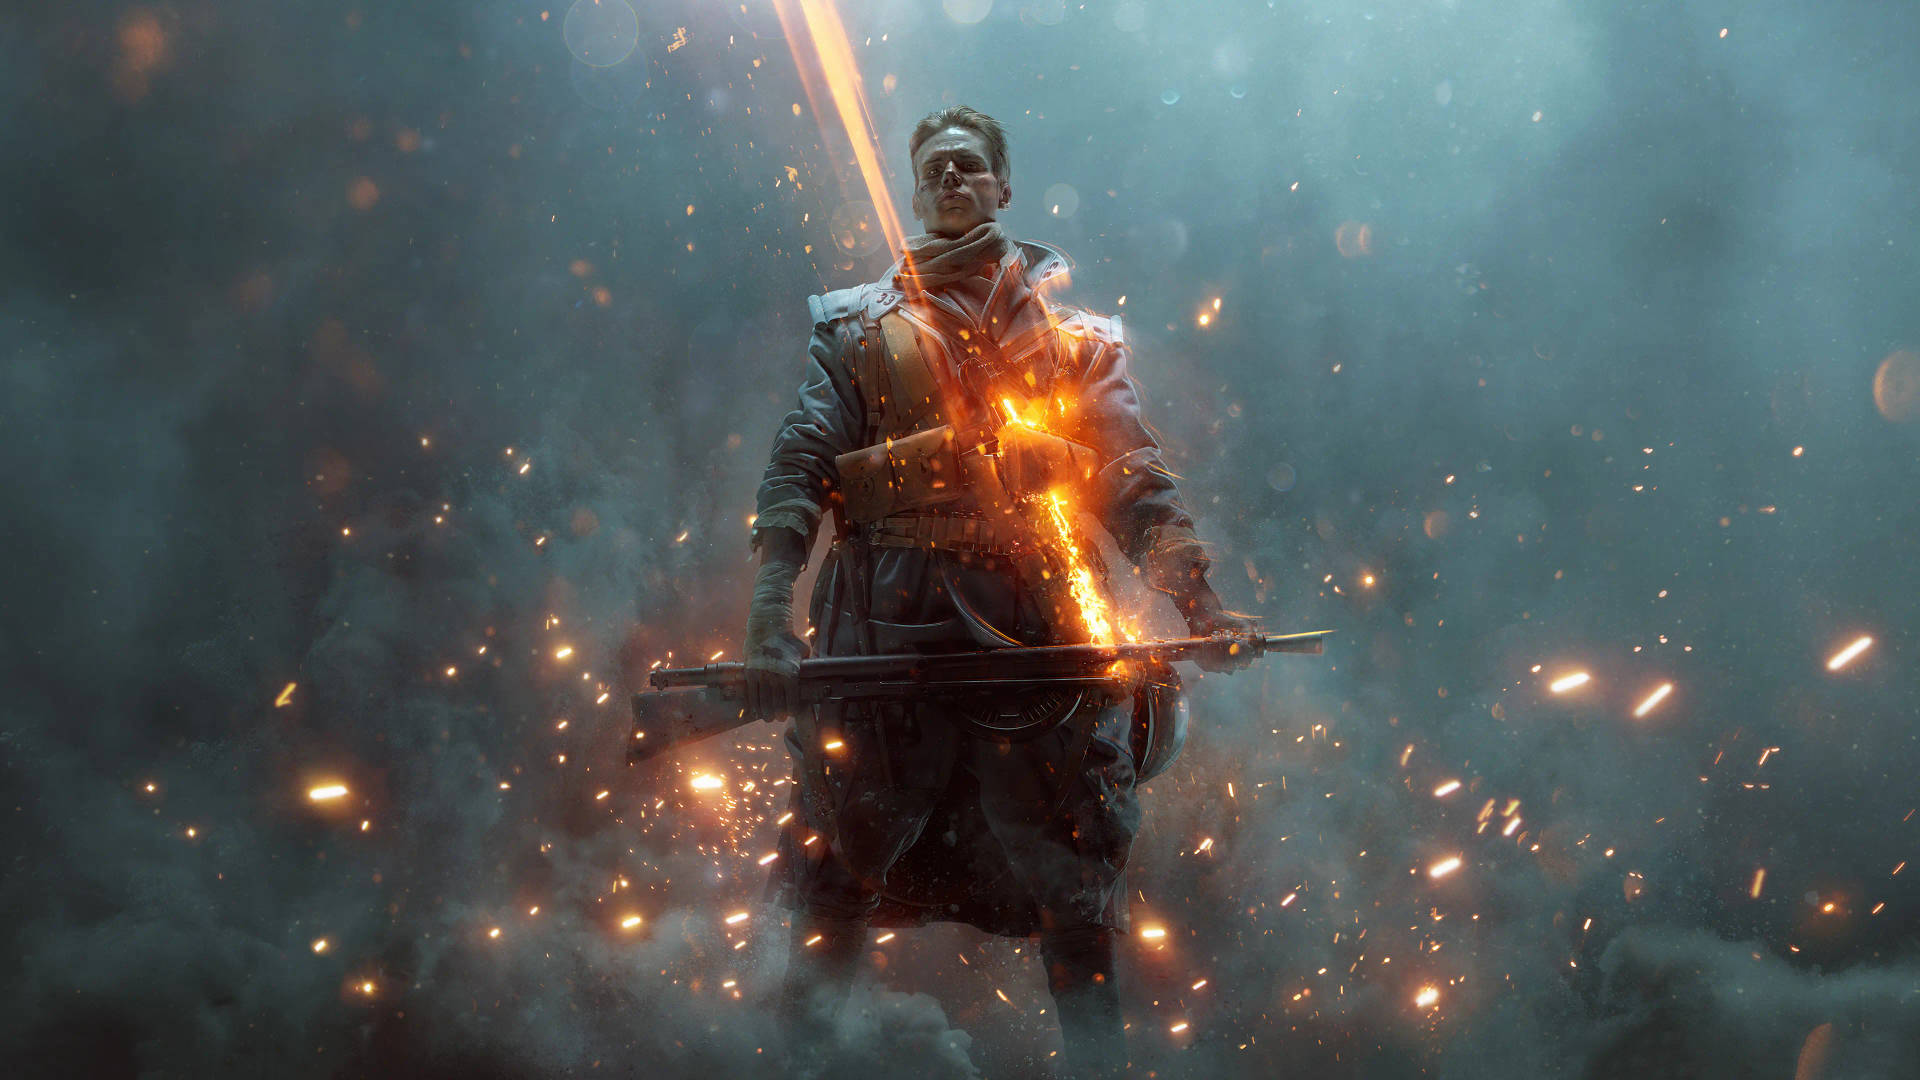 Caption: Stunning 4k Representation Of A French Soldier Wielding A Chauchat In Battlefield 1 Background